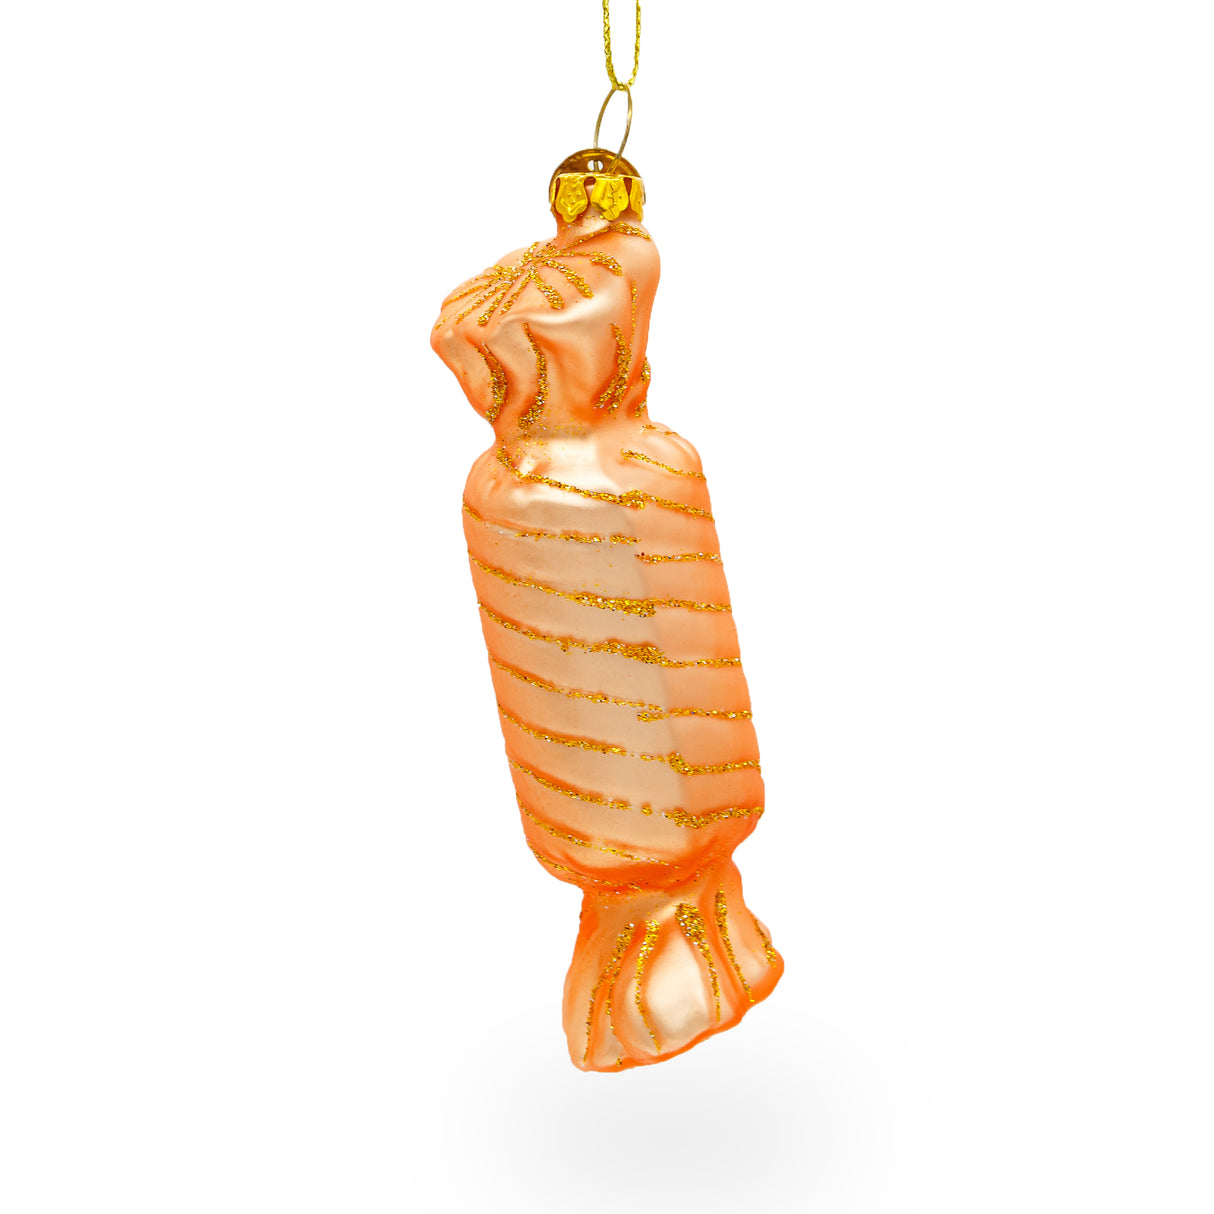 Hard Candy Food - Blown Glass Christmas Ornament in Orange color,  shape